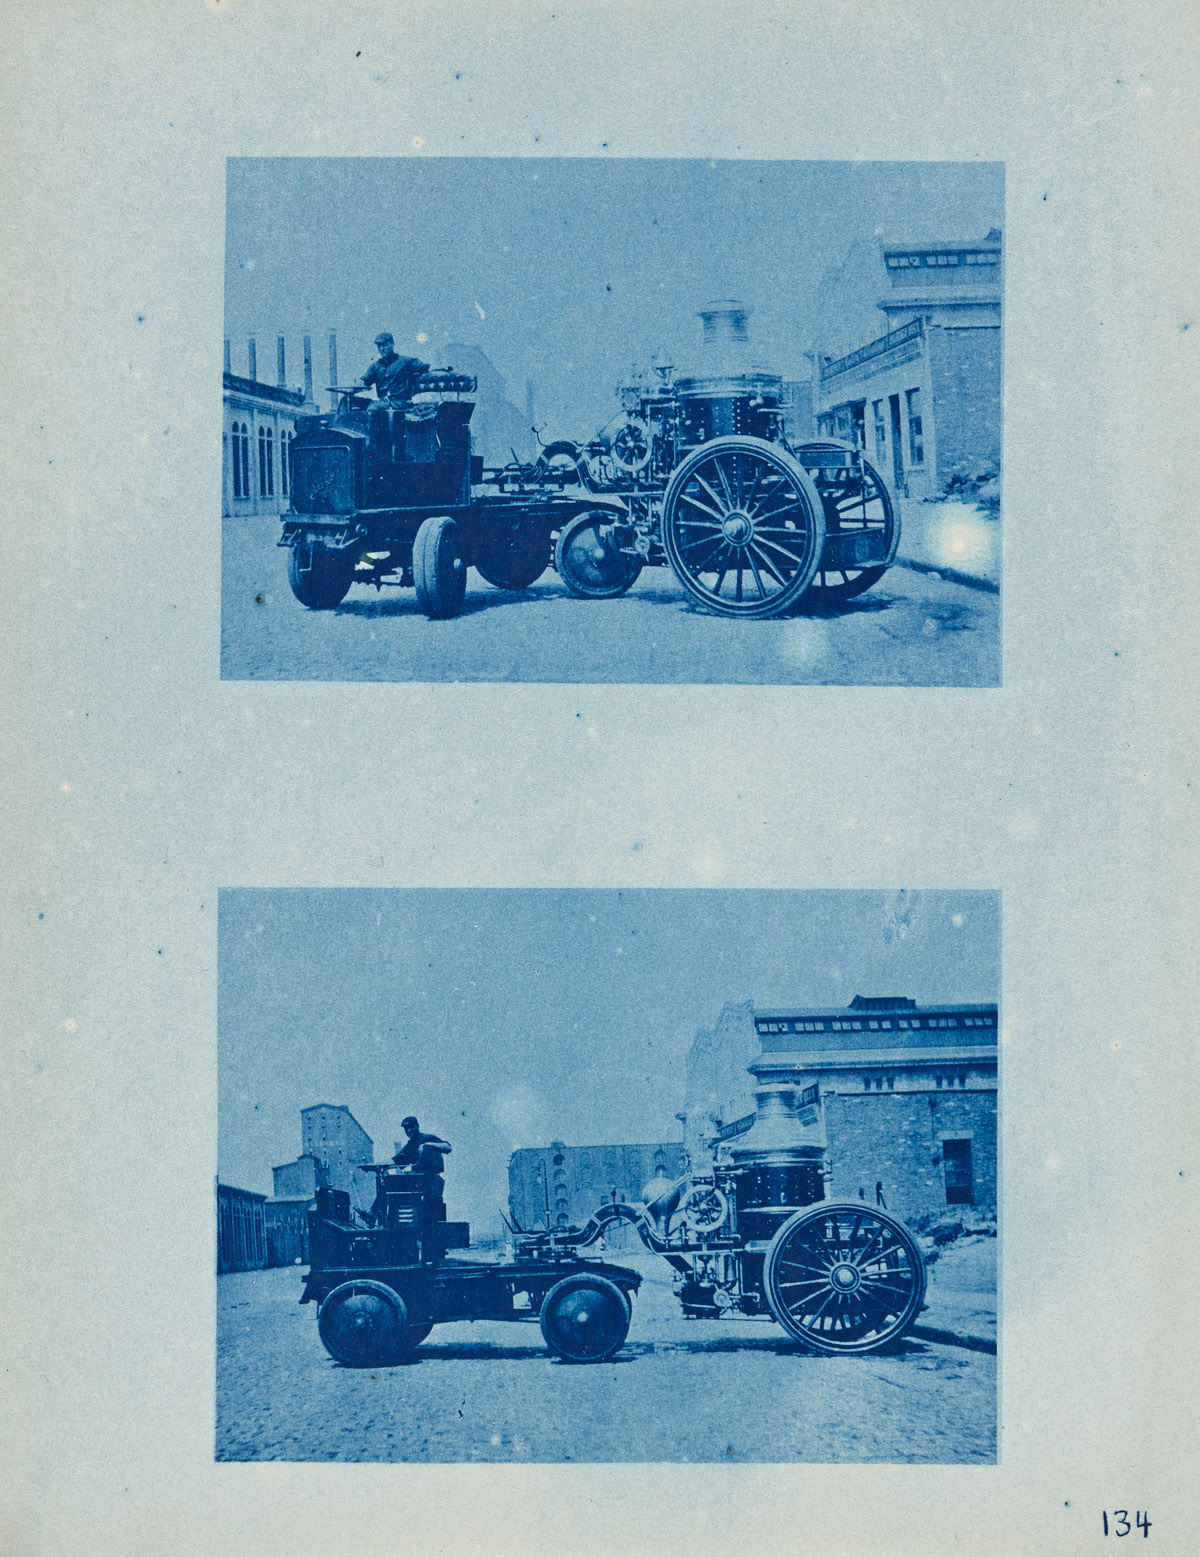 (CYANOTYPES) A selection of 22 richly-printed and finely-composed cyanotypes depicting a variety of delivery and freight vehicles.